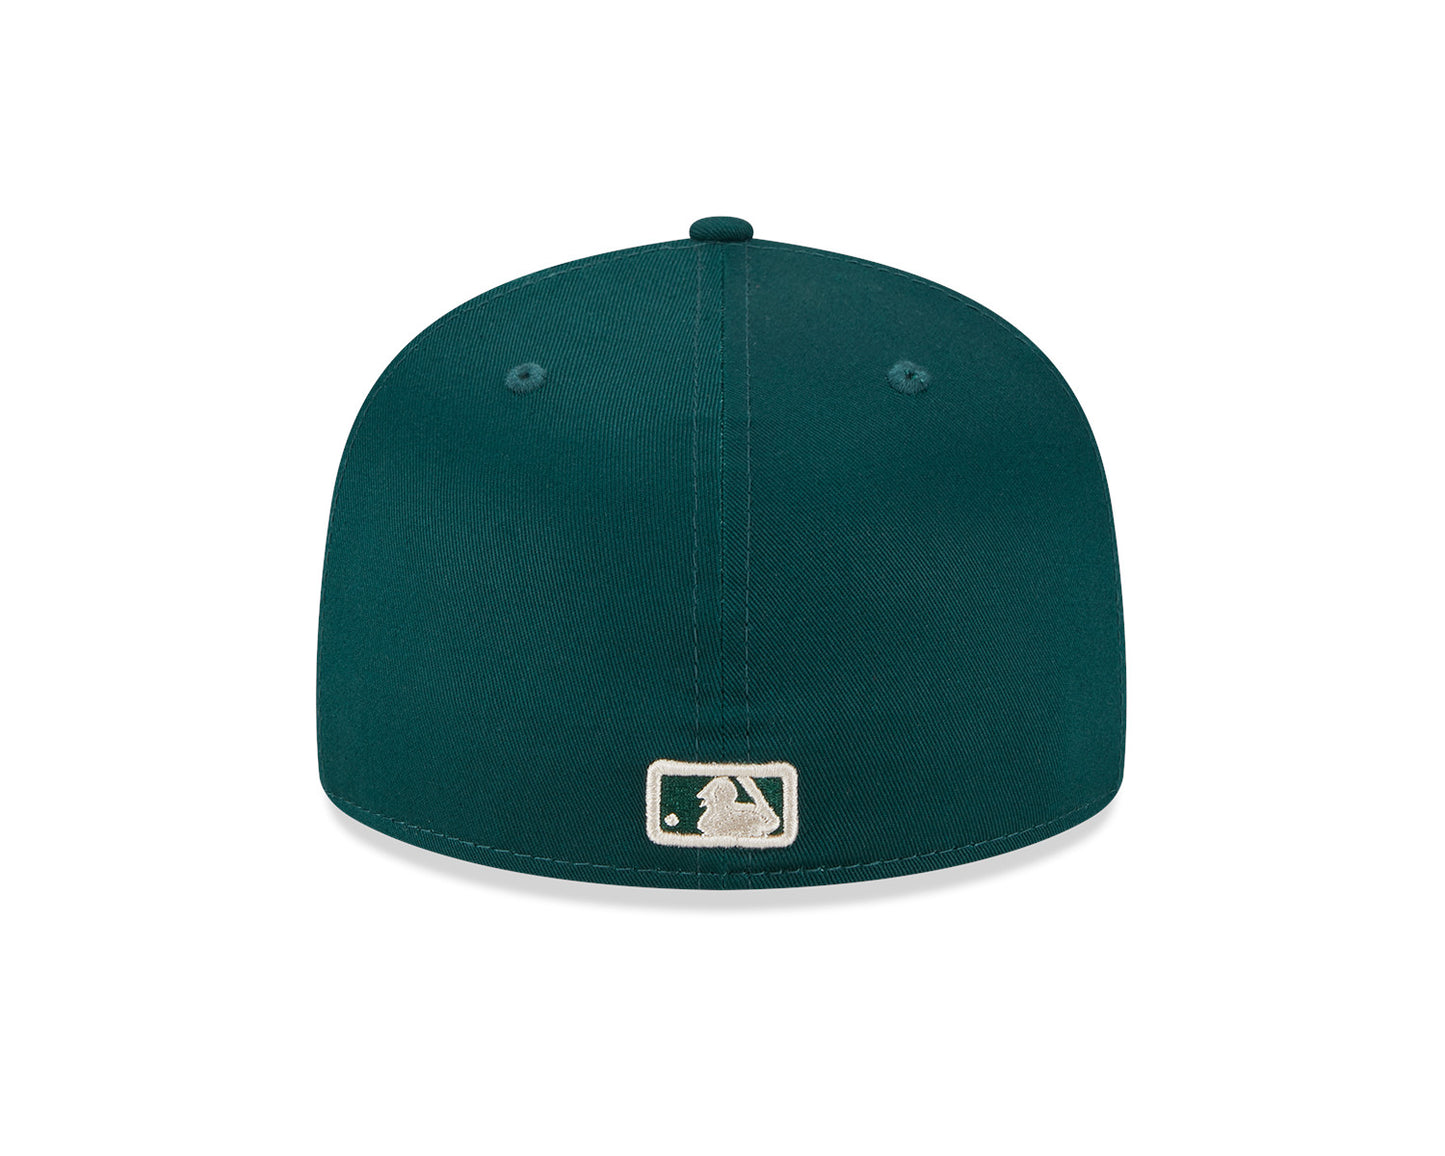 New Era - 59Fifty Fitted Cap - League Essential - Los Angeles Dodgers - Dark Green/Stone - Headz Up 